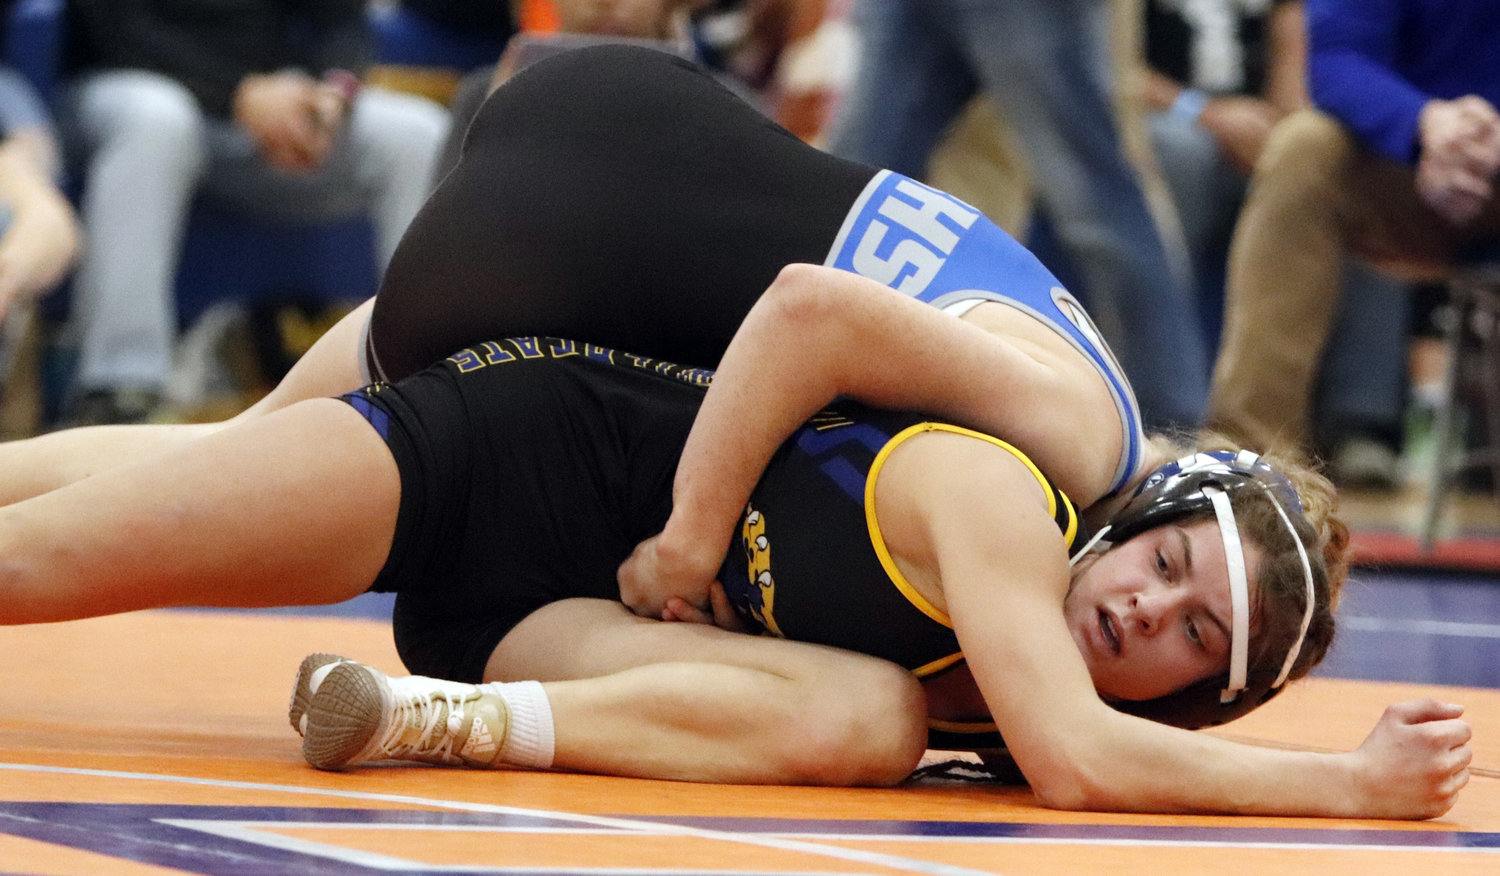 Elizabeth Riggs competes in the 125-pound semifinal match last weekend.